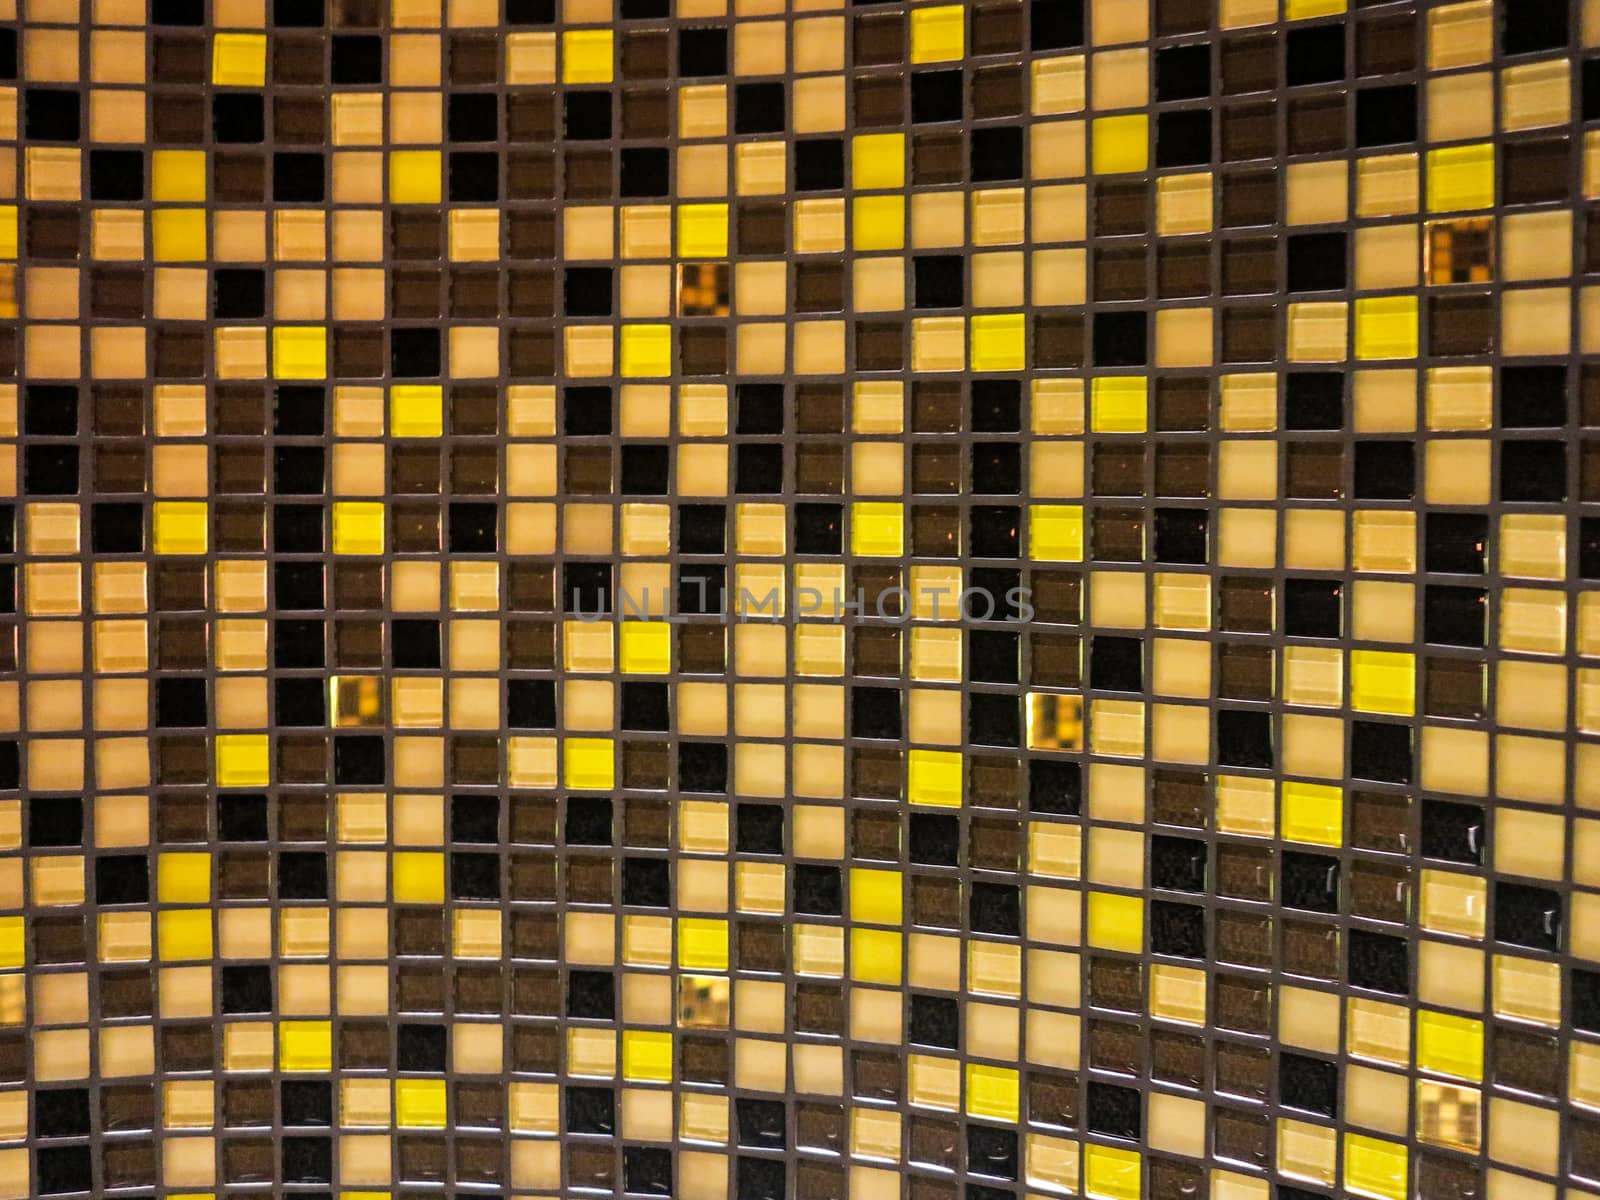 Checkered Pattern by quackersnaps